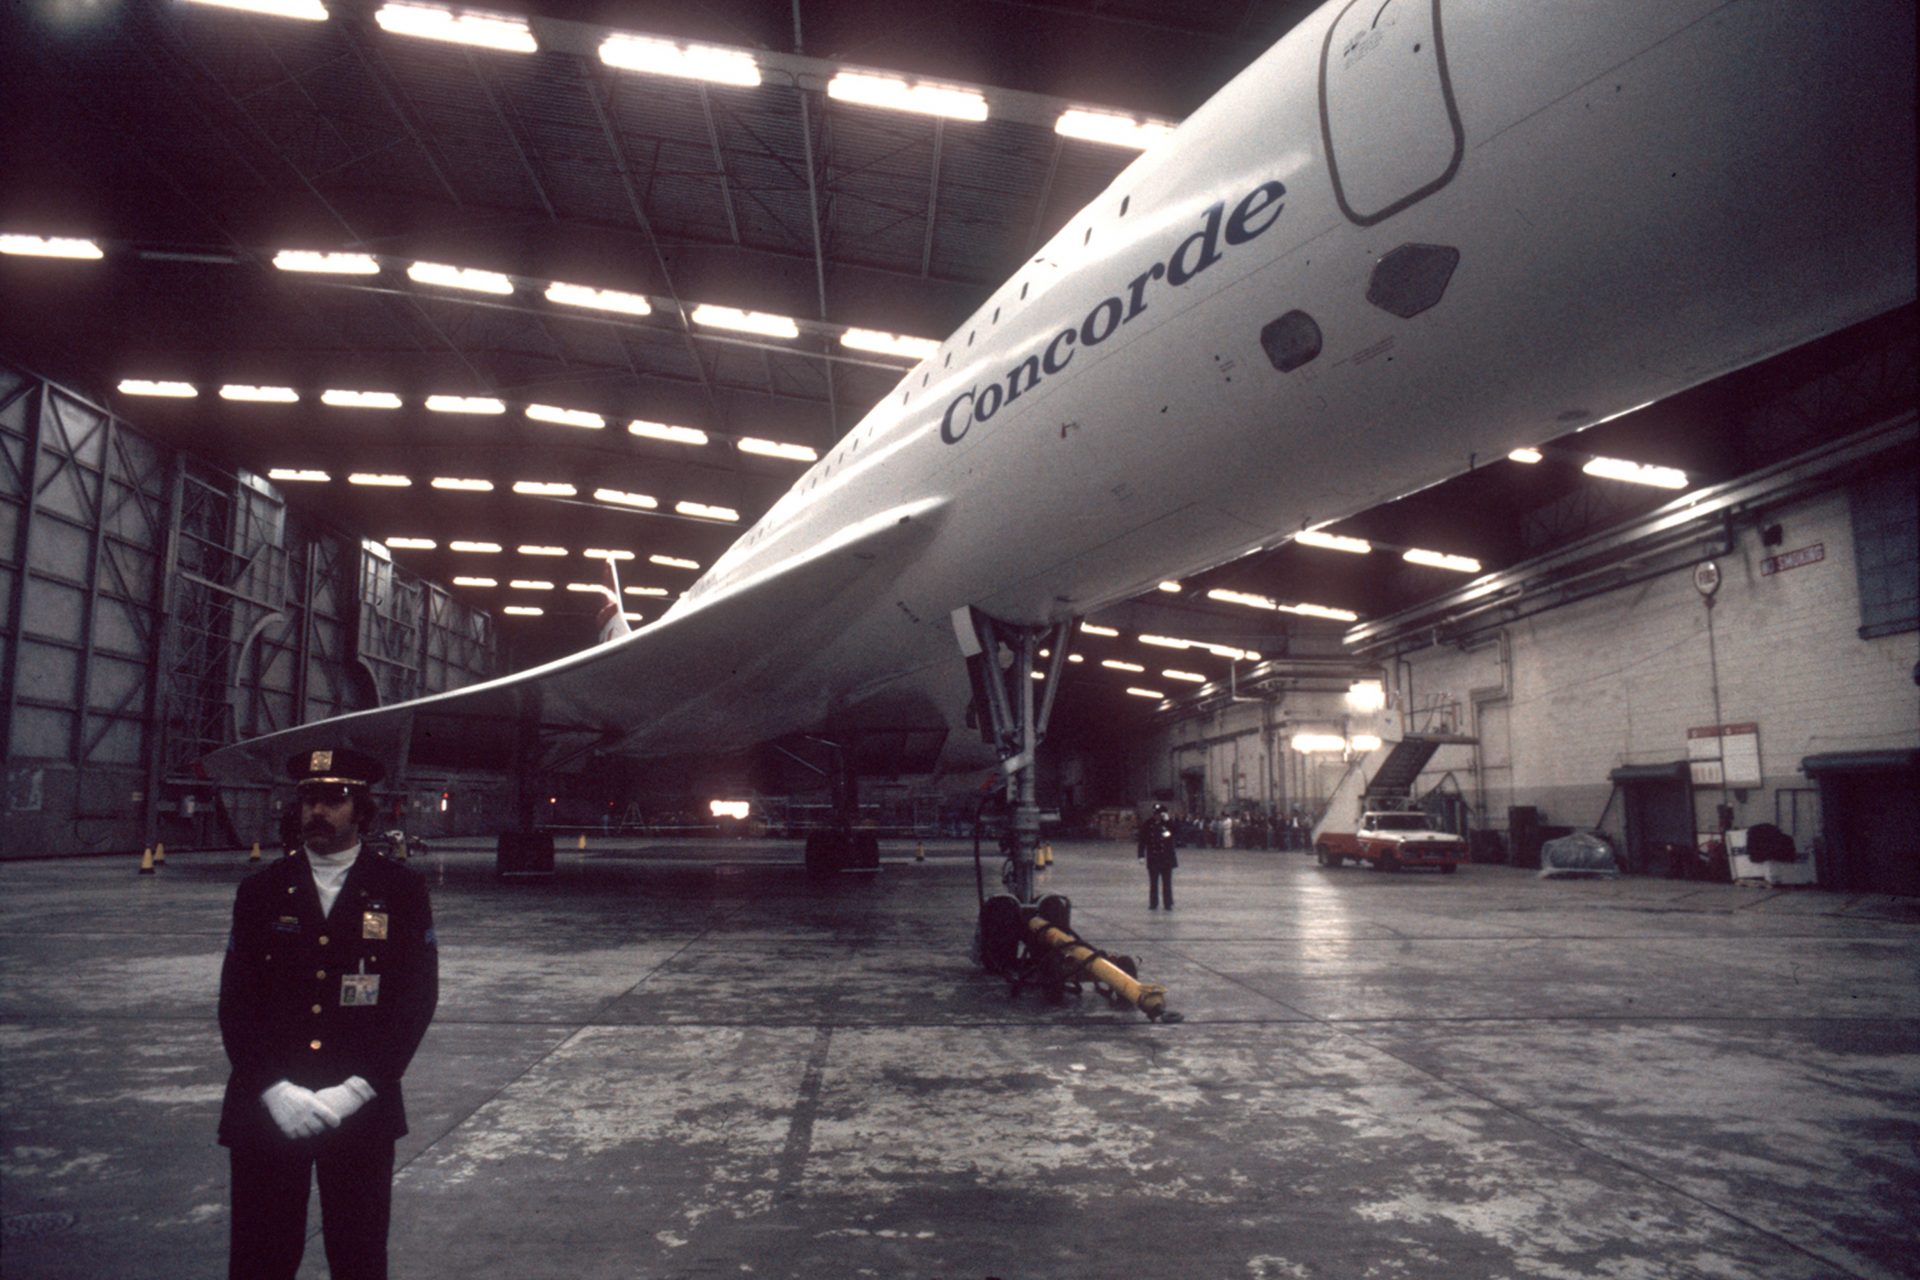 The Concorde was very fast 